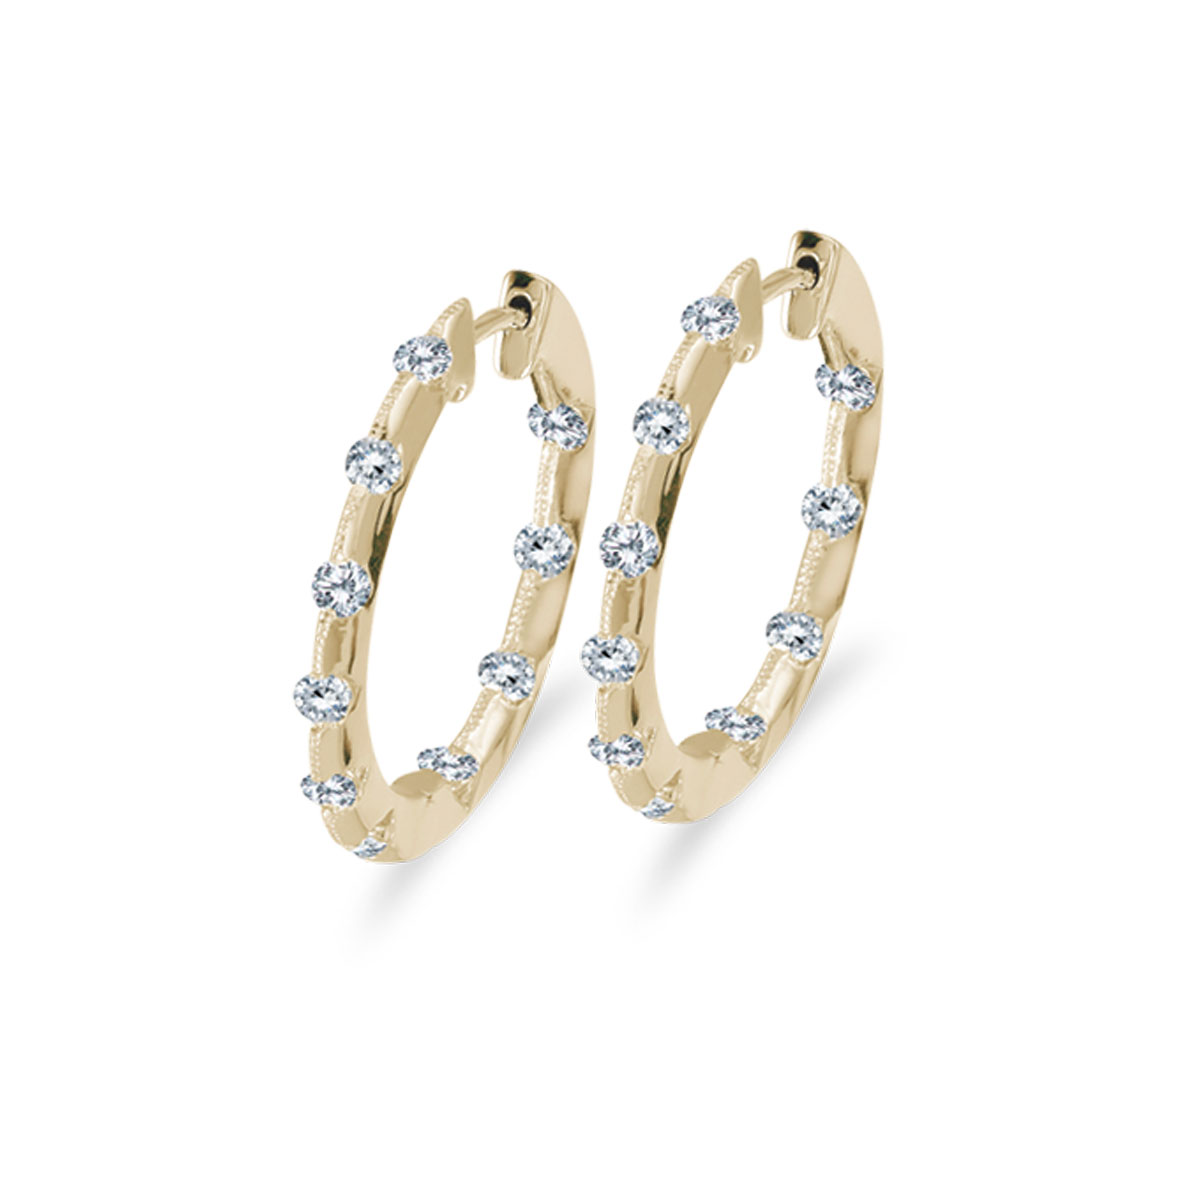 19 mm diamond inside/outside hoop earrings in beautiful 14k yellow gold. The perfect look for day...